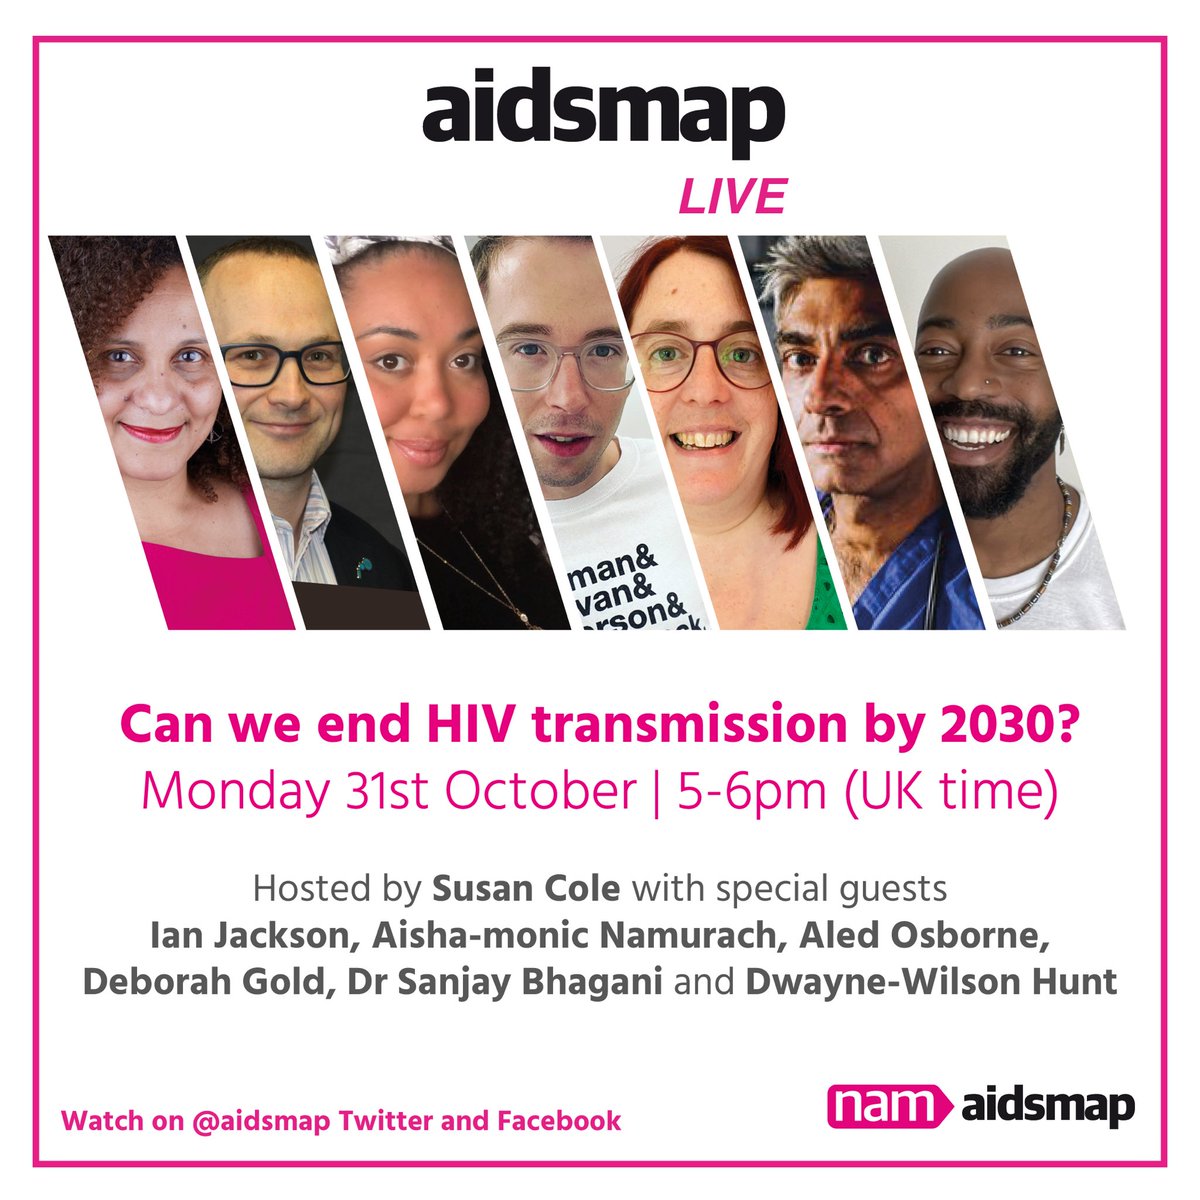 Thrilled to be back in the studio for #aidsmapLIVE 5pm on Mon 31st Oct. I’ll be discussing if we can end HIV transmission by 2030 with an incredible panel: @IJackson78, @aishaladyluck, @aledoz, @deborahagold, @sanjaybhagani & @yoitsmistadee. Watch on @aidsmap Facebook & Twitter